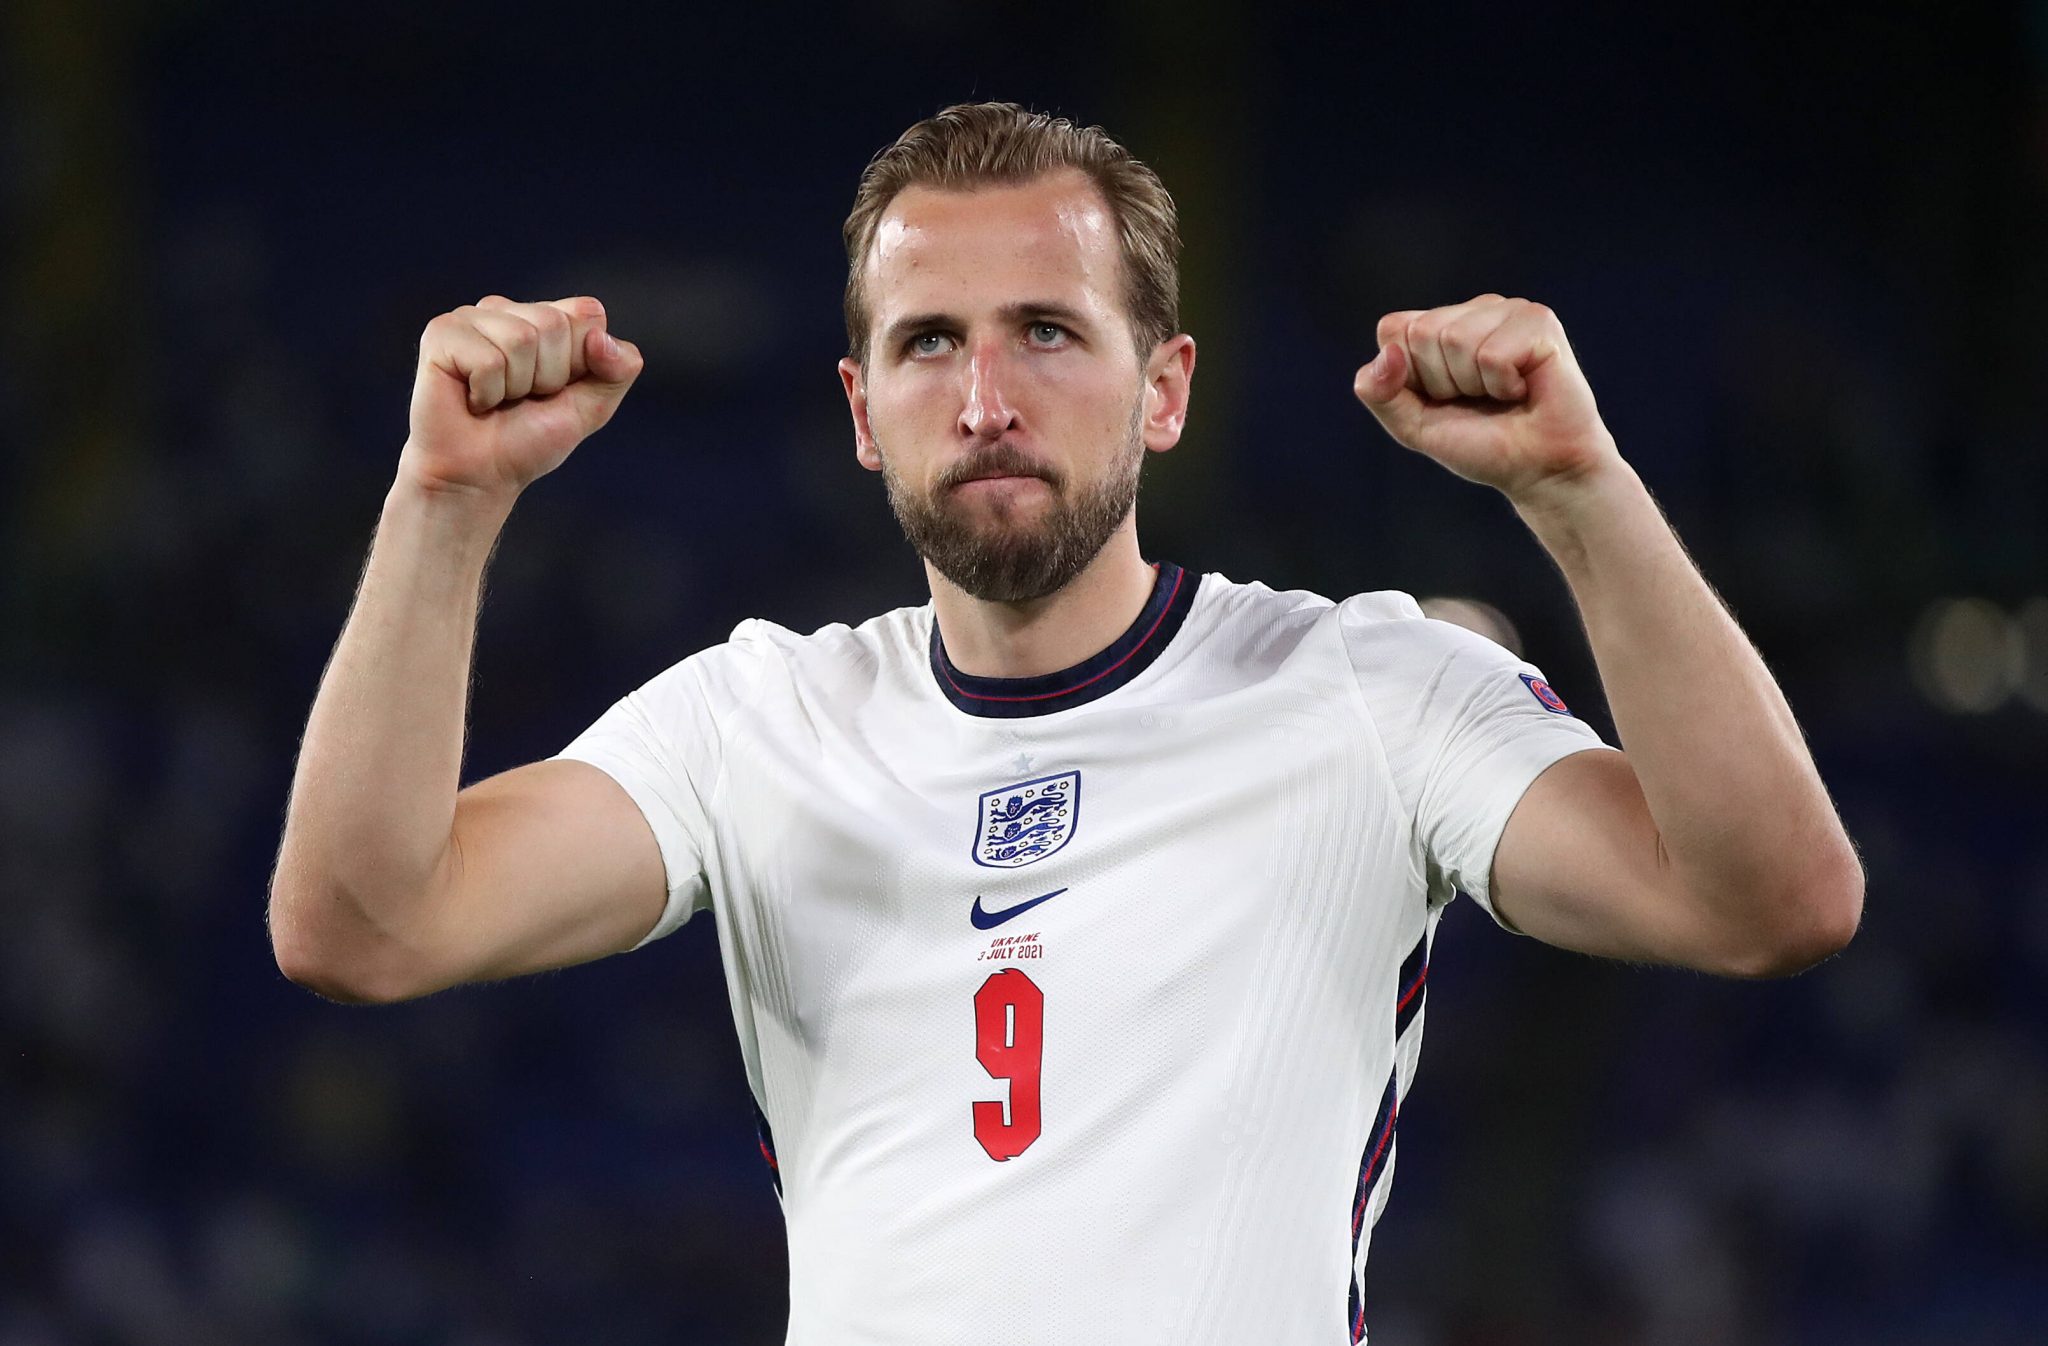  Harry Kane celebrates scoring a brilliant curved shot against Arsenal in 2016.